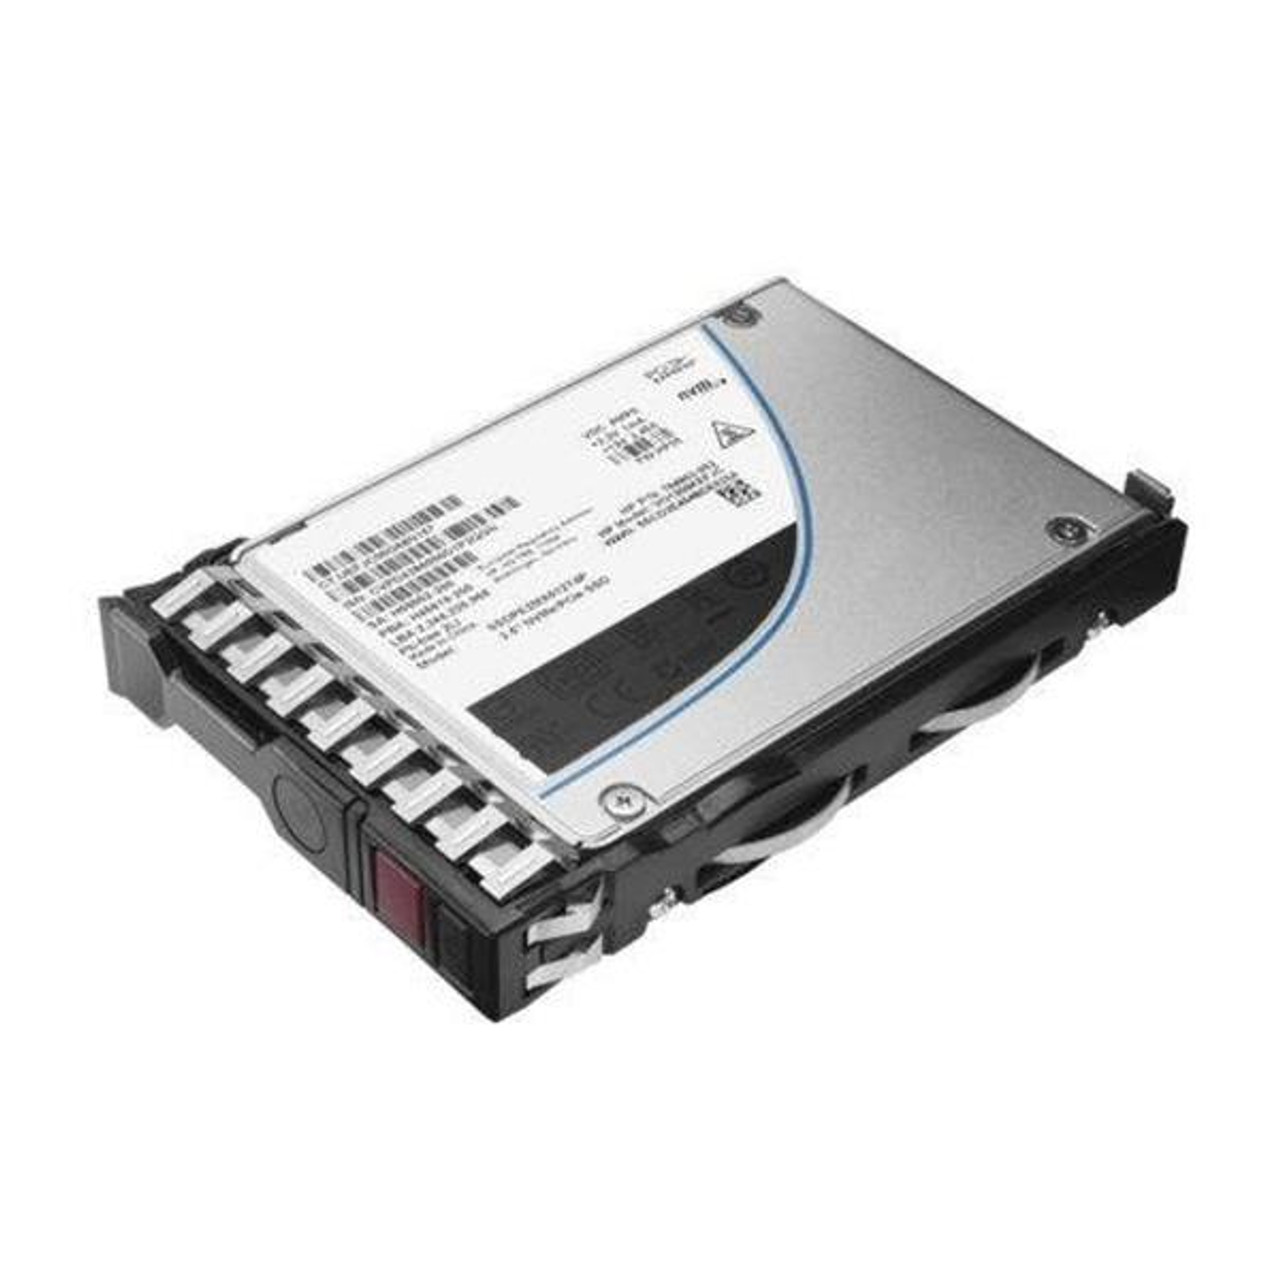 HPE PM893 3.84TB SATA 6Gbps Read Intensive 2.5-inch Internal Solid State Drive SSD